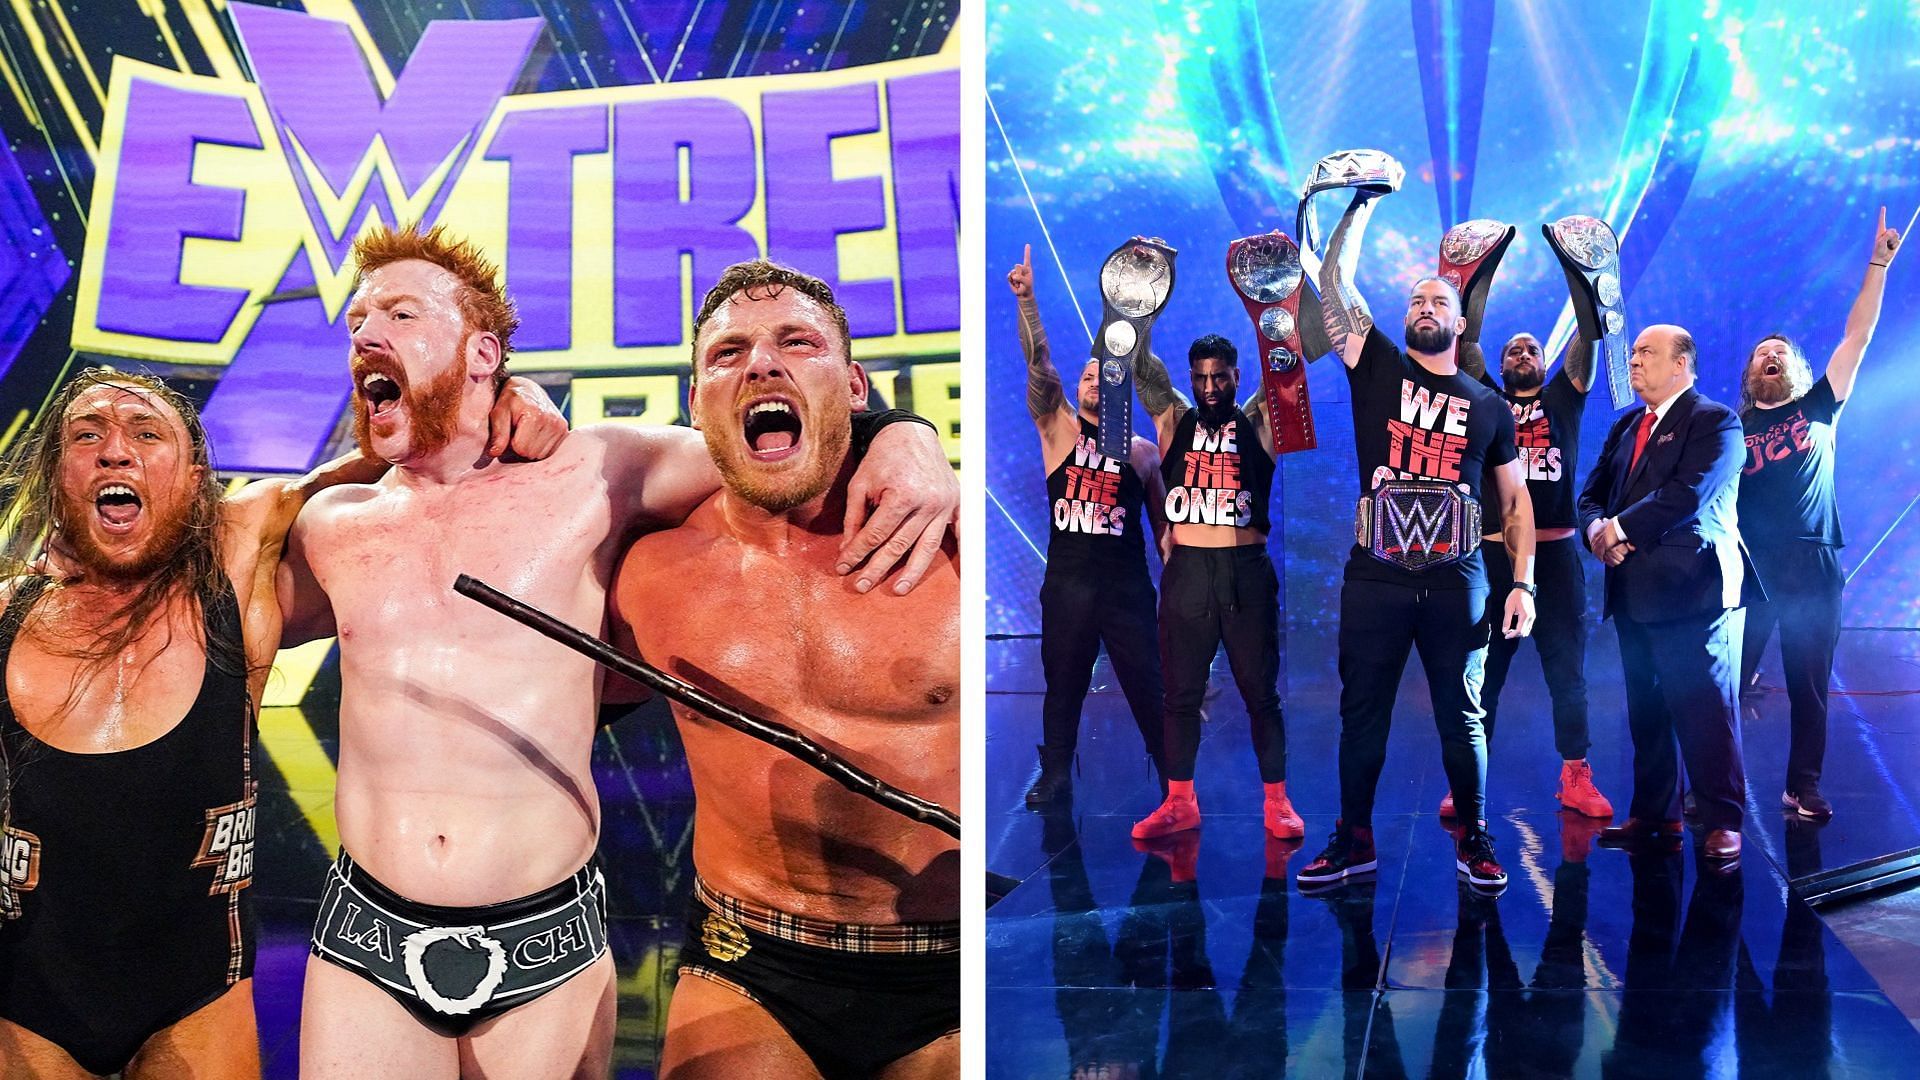 The Brawling Brutes had an epic six-man tag team bout at WWE Extreme Rules 2022